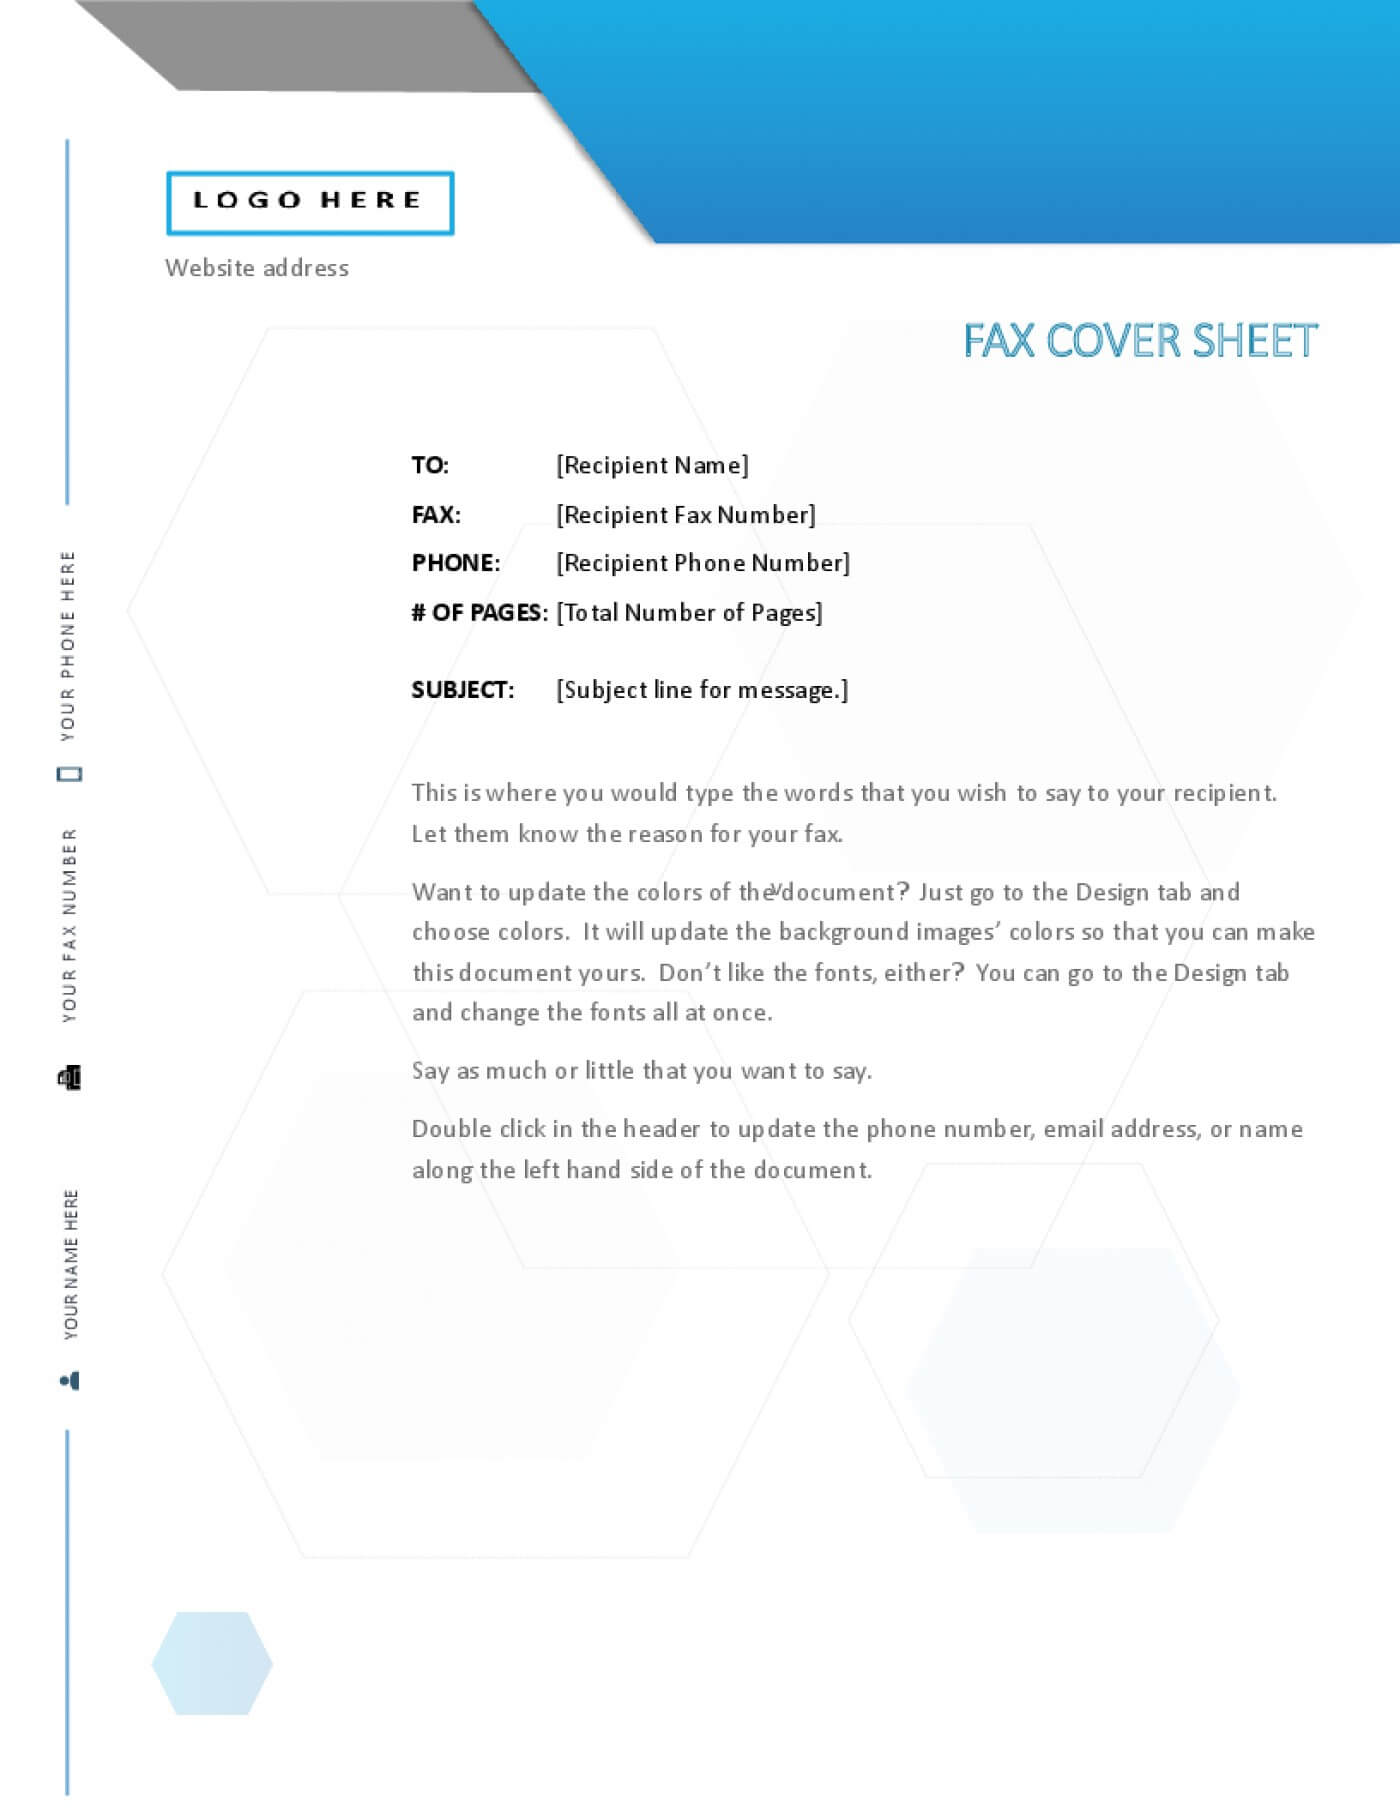 010 Fax Covers Office Inside Cover Sheet Template Word Best Within Fax Cover Sheet Template Word 2010